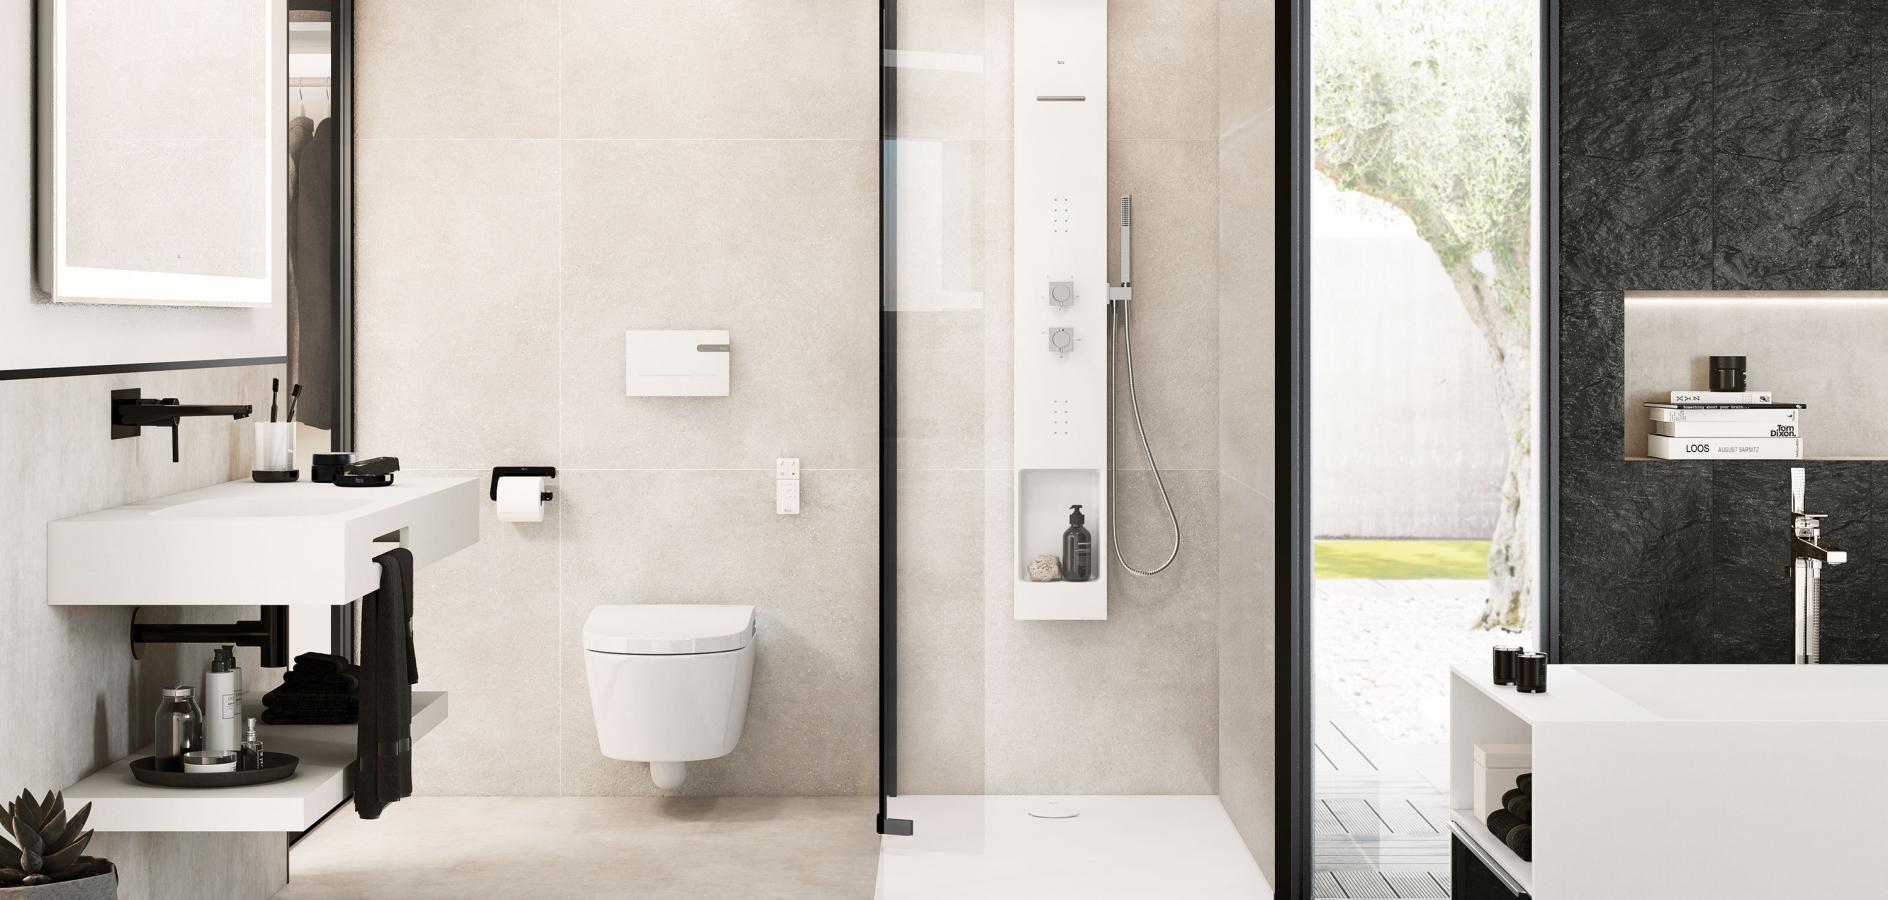 Modern bathrooms, the latest in technology and design │ Roca Life